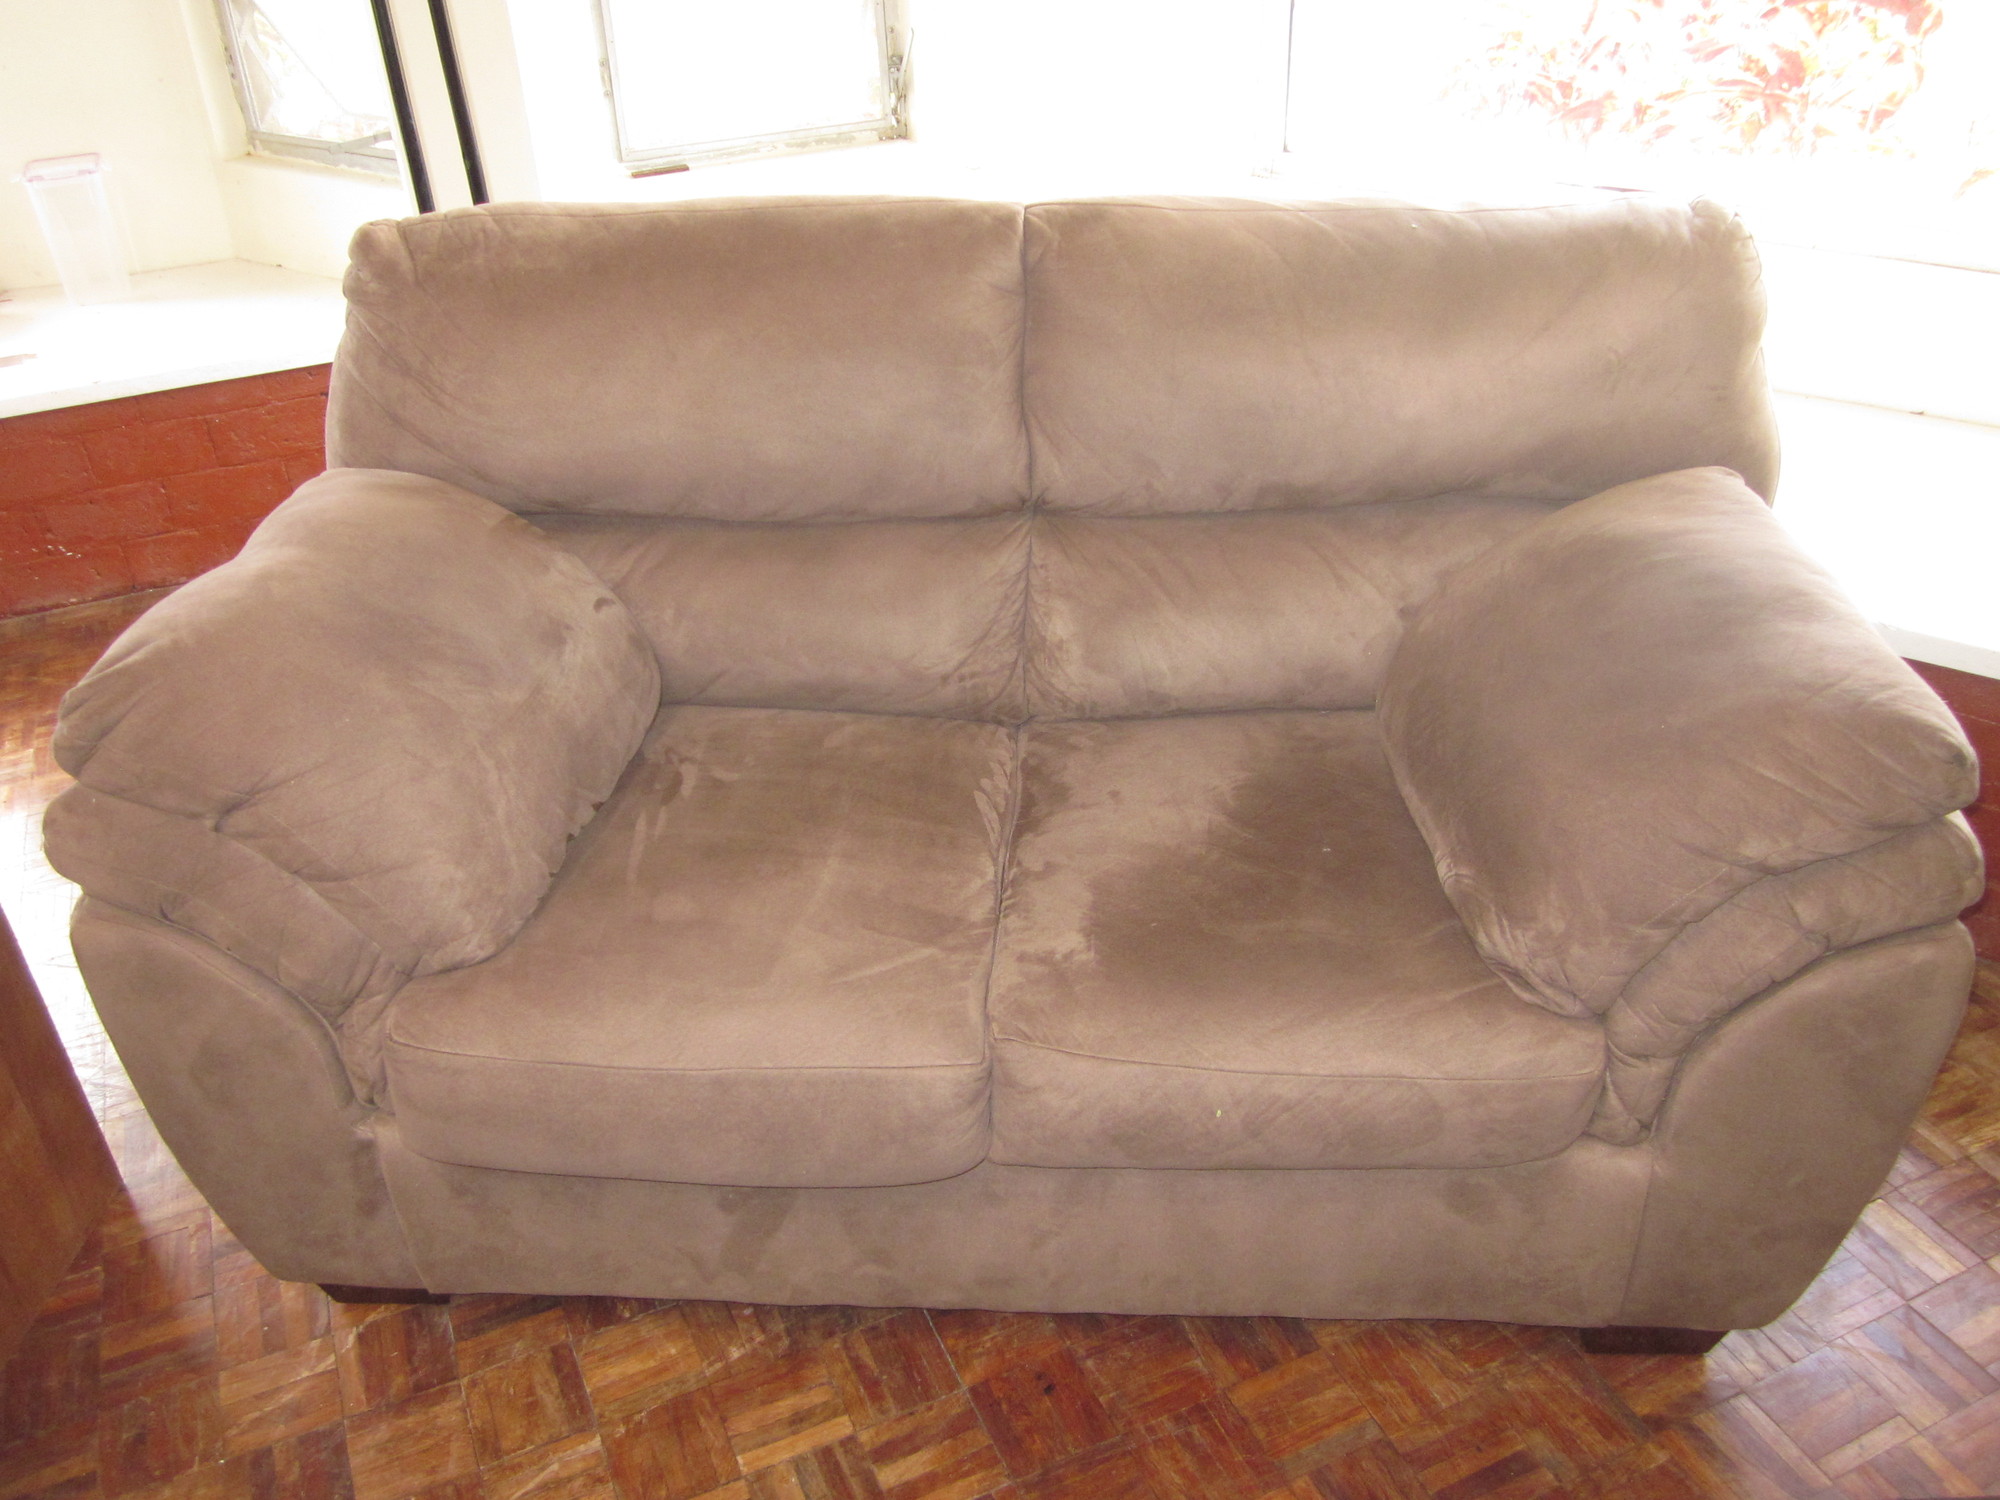 Couch set (3 seat and 2 seat)